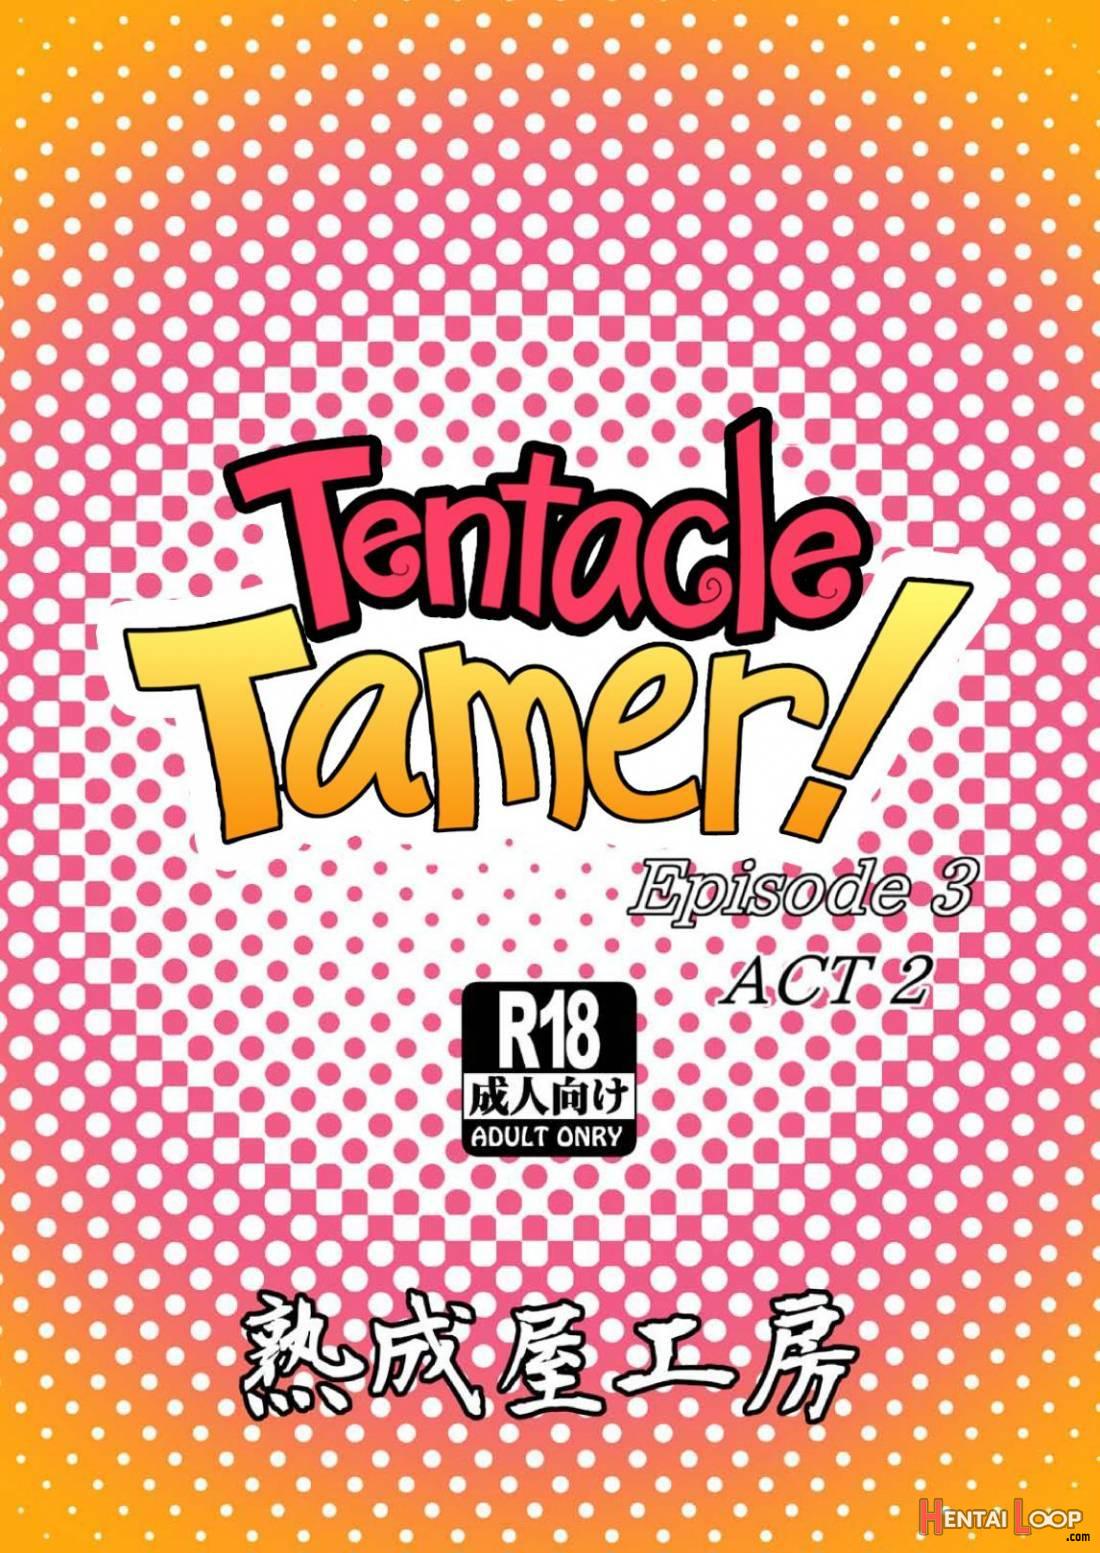 Tentacle Tamer! Episode 3 Act 2 page 44